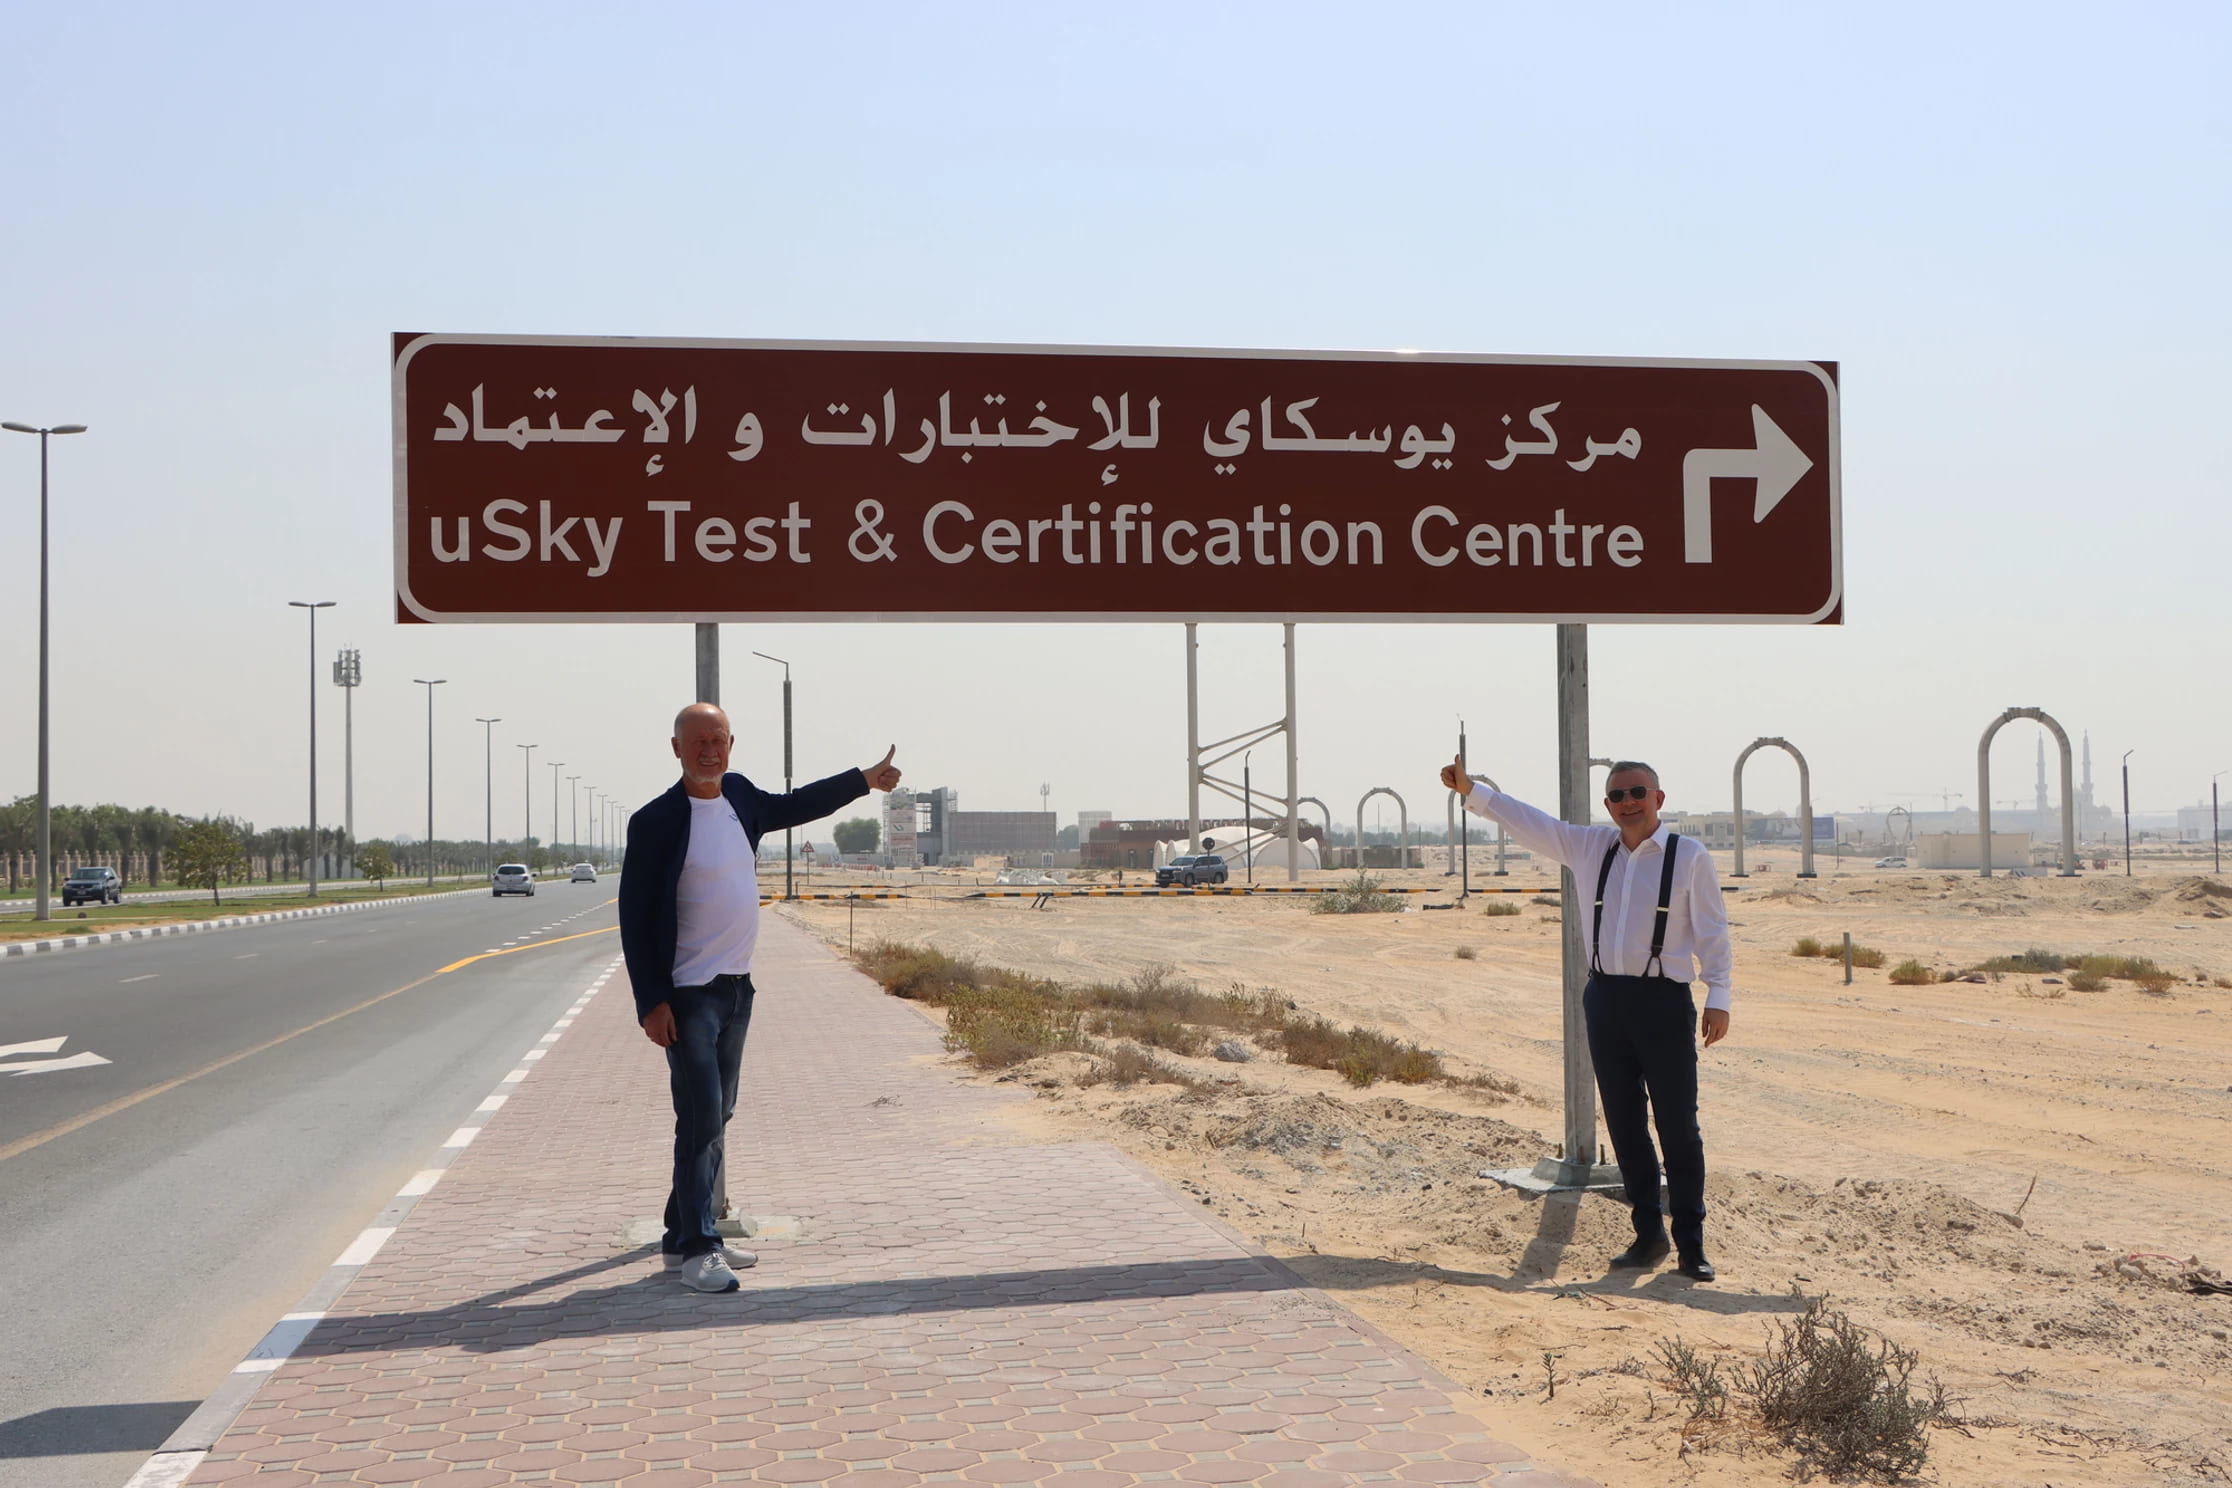 uSky Transport top management welcoming to get familiar with cutting-edge transport technology at uSky Test & Certification Centre in the Emirate of Sharjah